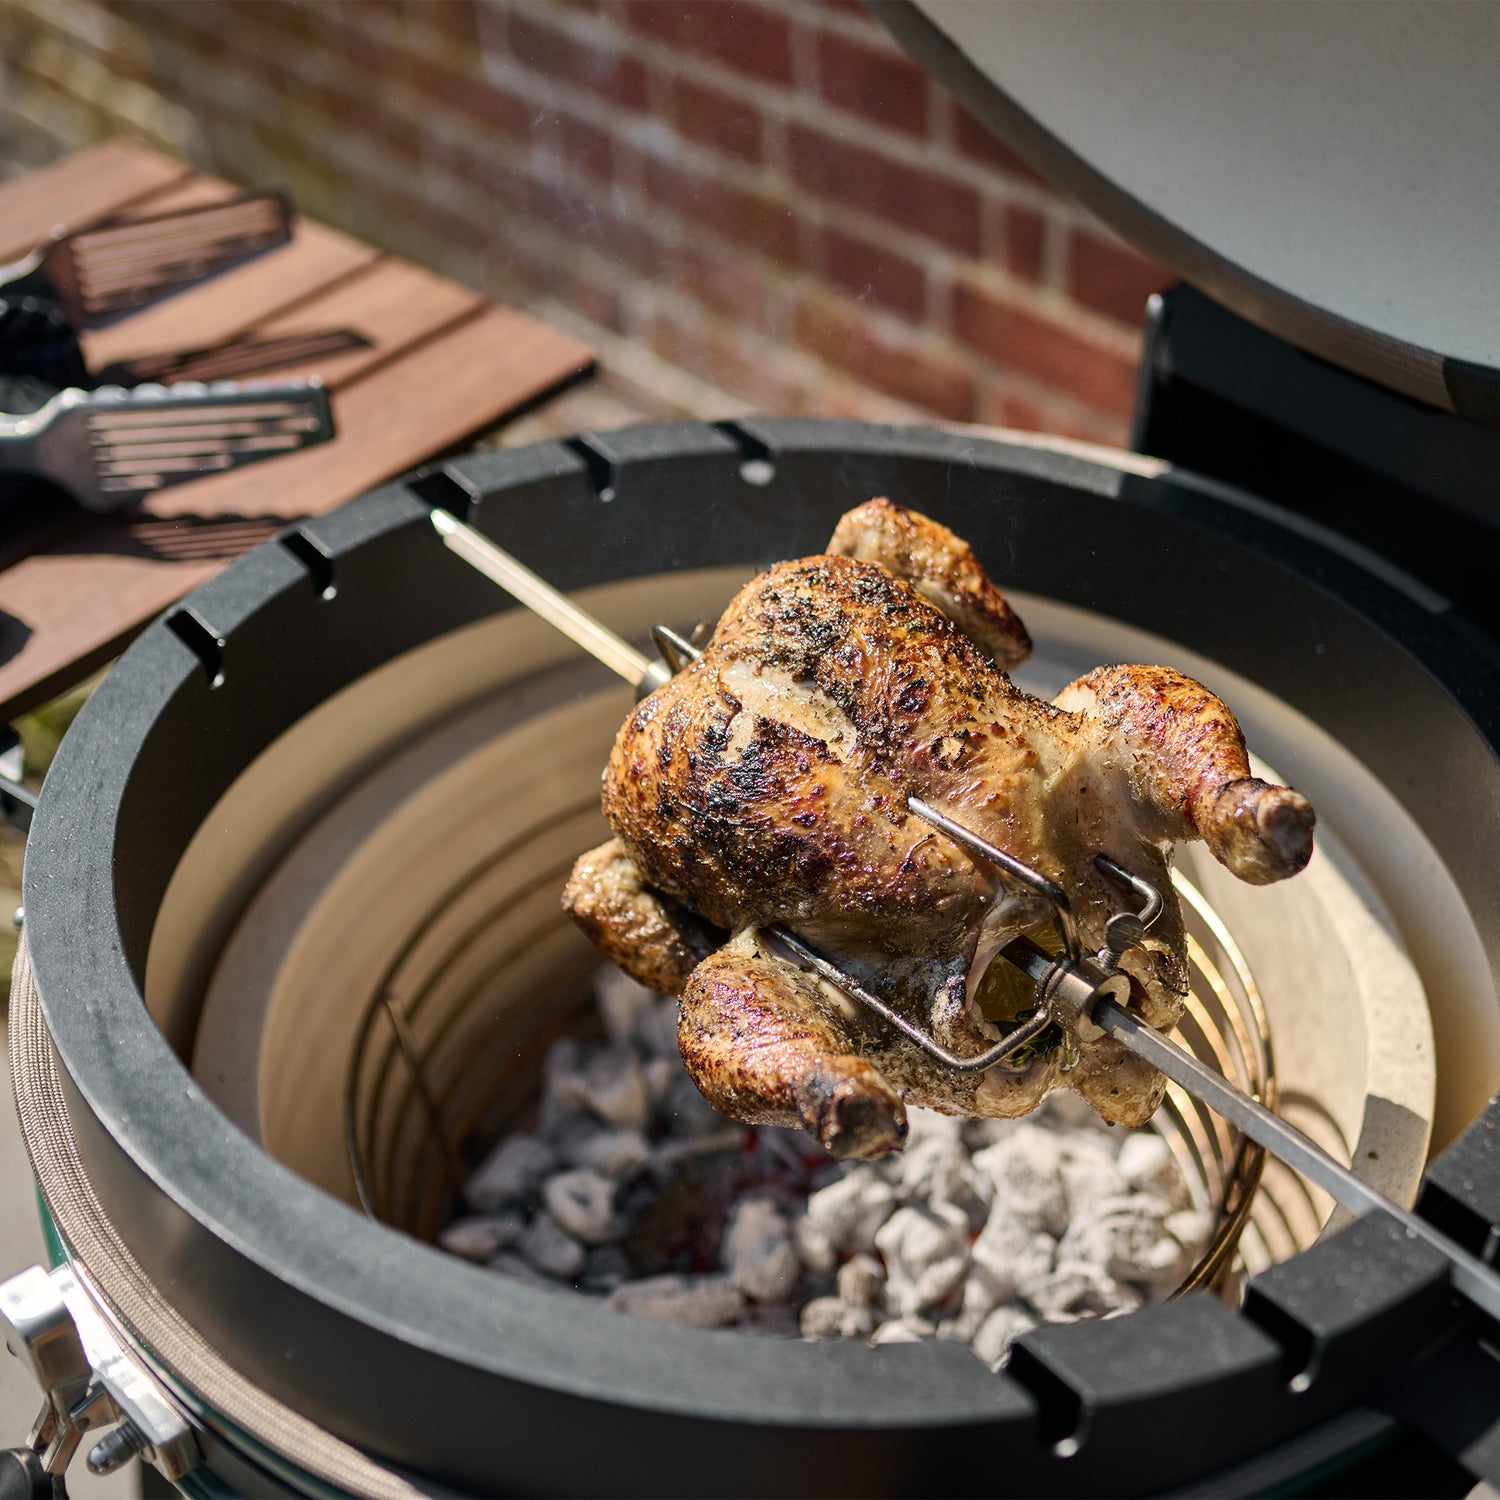 Kamado Grill Recipe for a Summer Evening: Truffle Herb Rotisserie Chicken